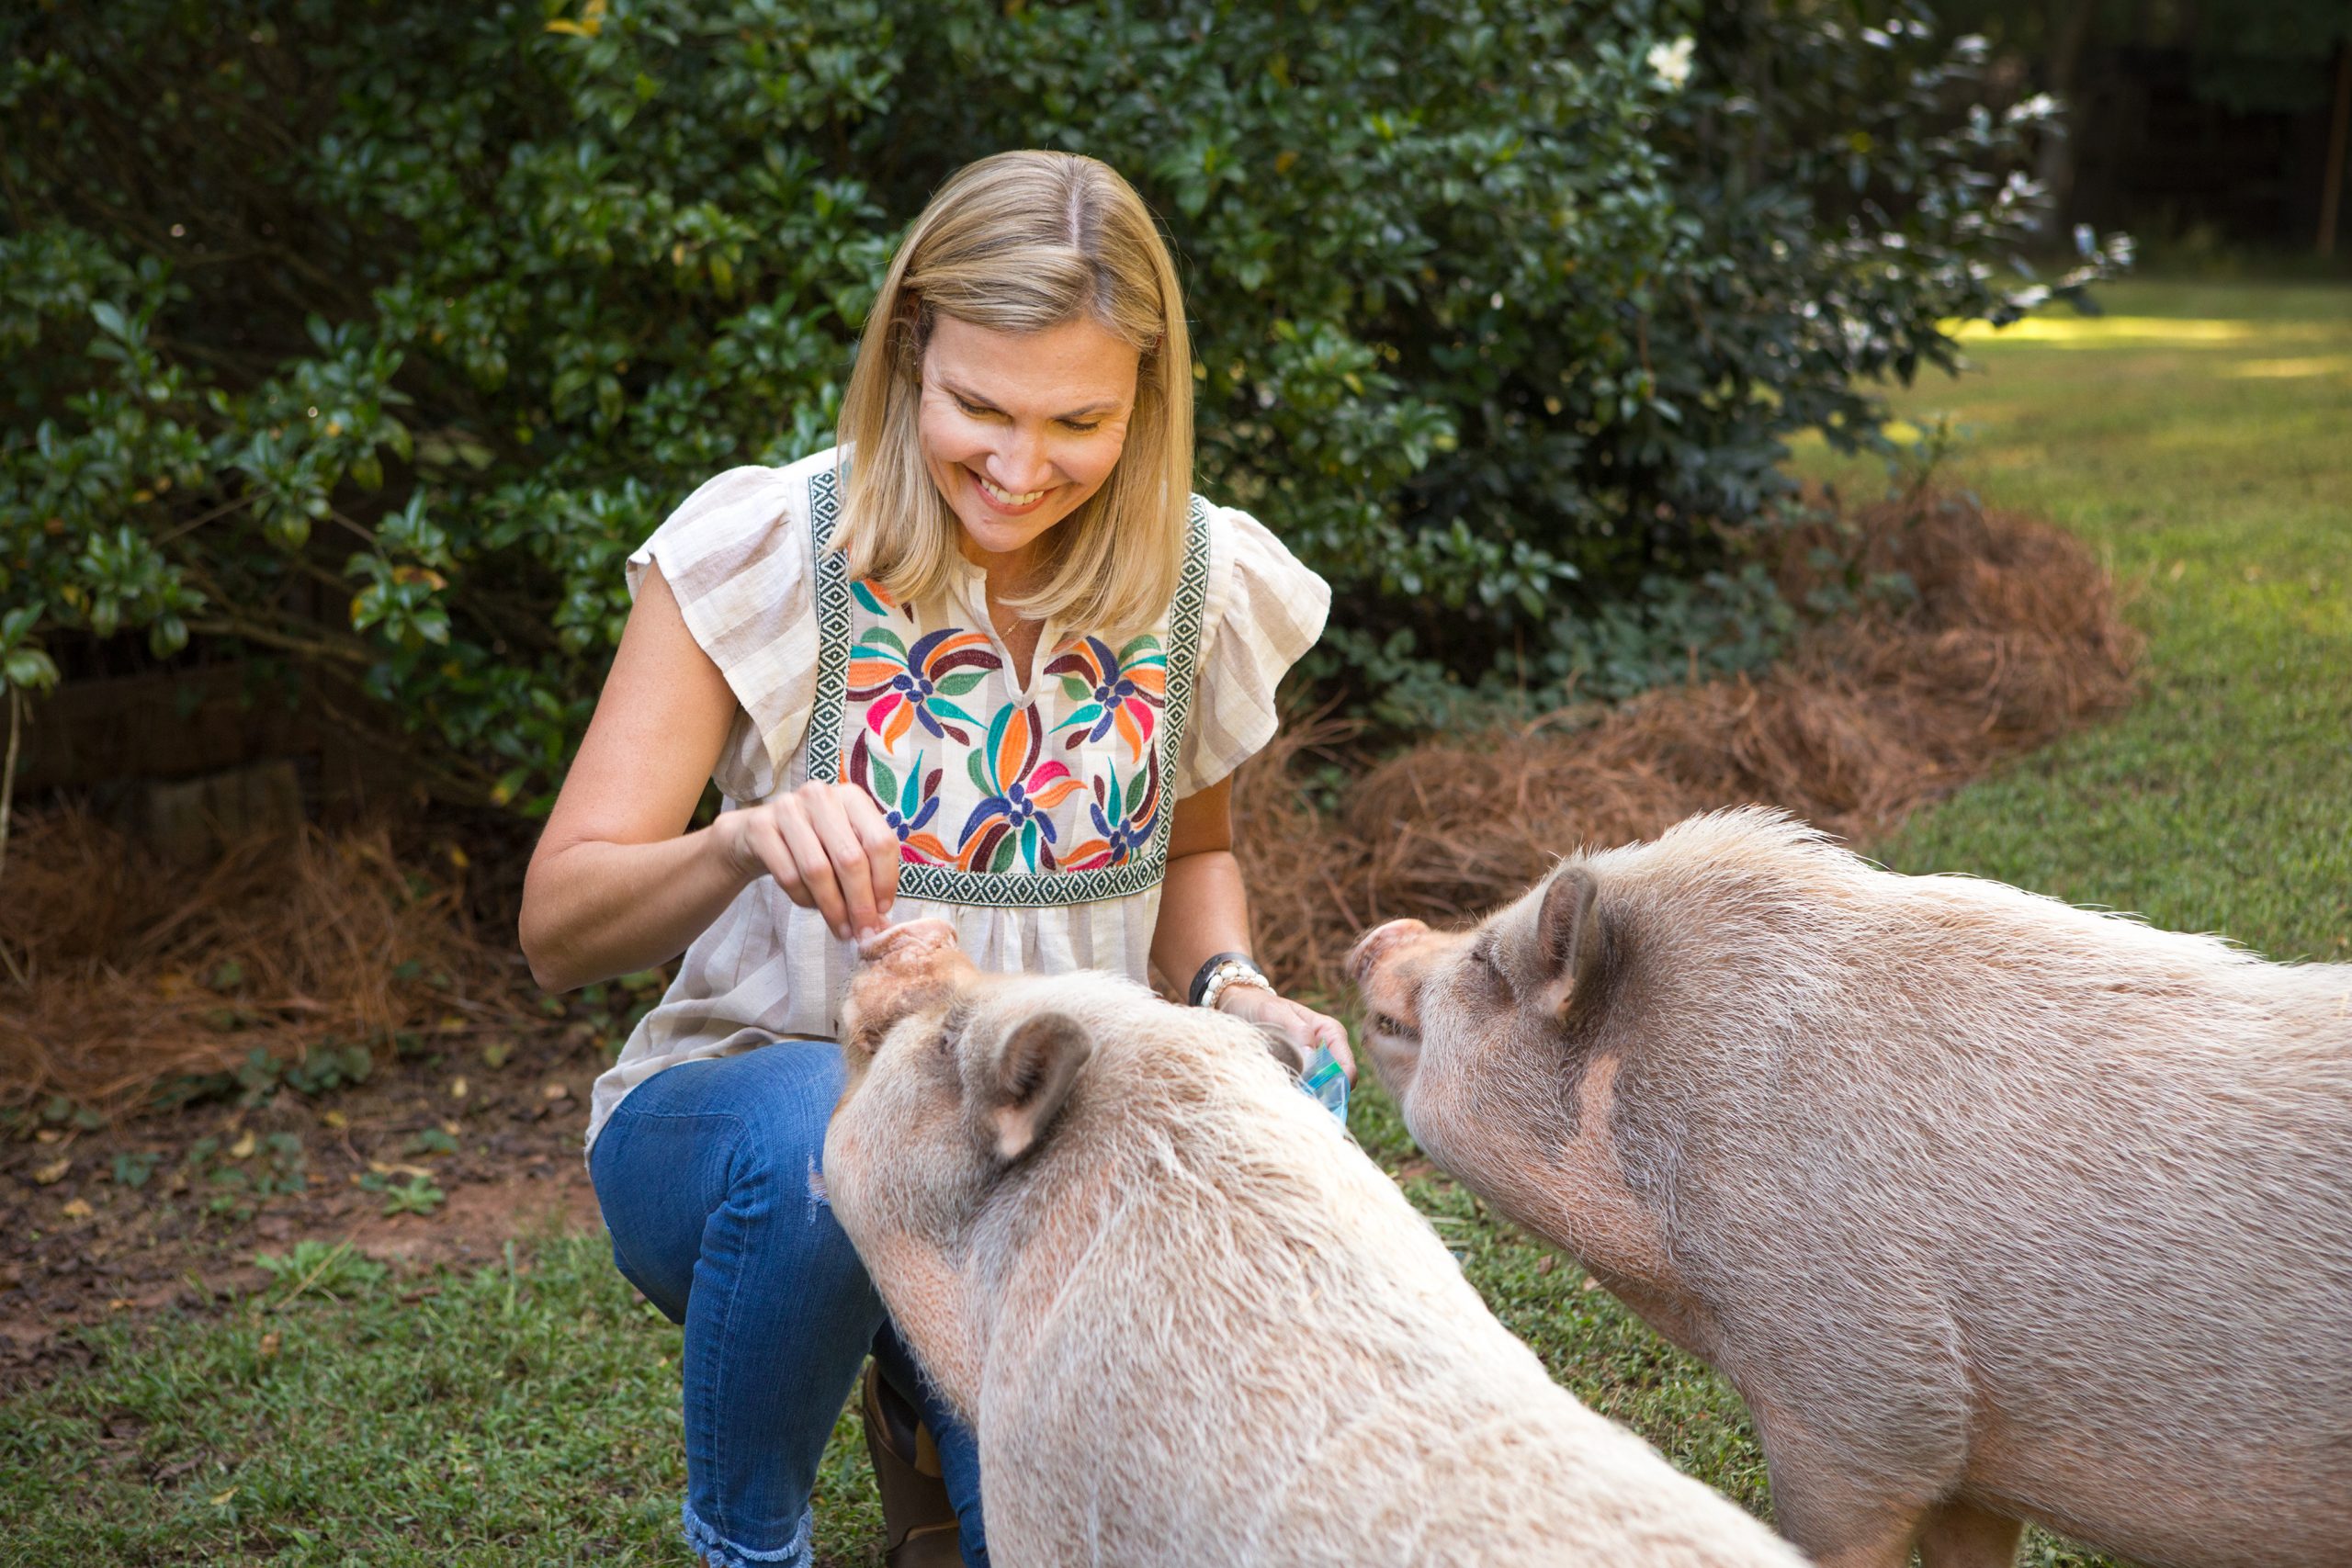 Potbellied pigs Dez and Cody were gifts to Kristin Johnson from her sons, Tucker and Mac, in 2017. Sold to them from a smooth-talking vendor, the pigs were advertised as “teacup” pigs that would remain under 30 pounds. However, Kristin has learned that the potbellied variety are not certain to be small and may grow to be 100 to 150 pounds. 